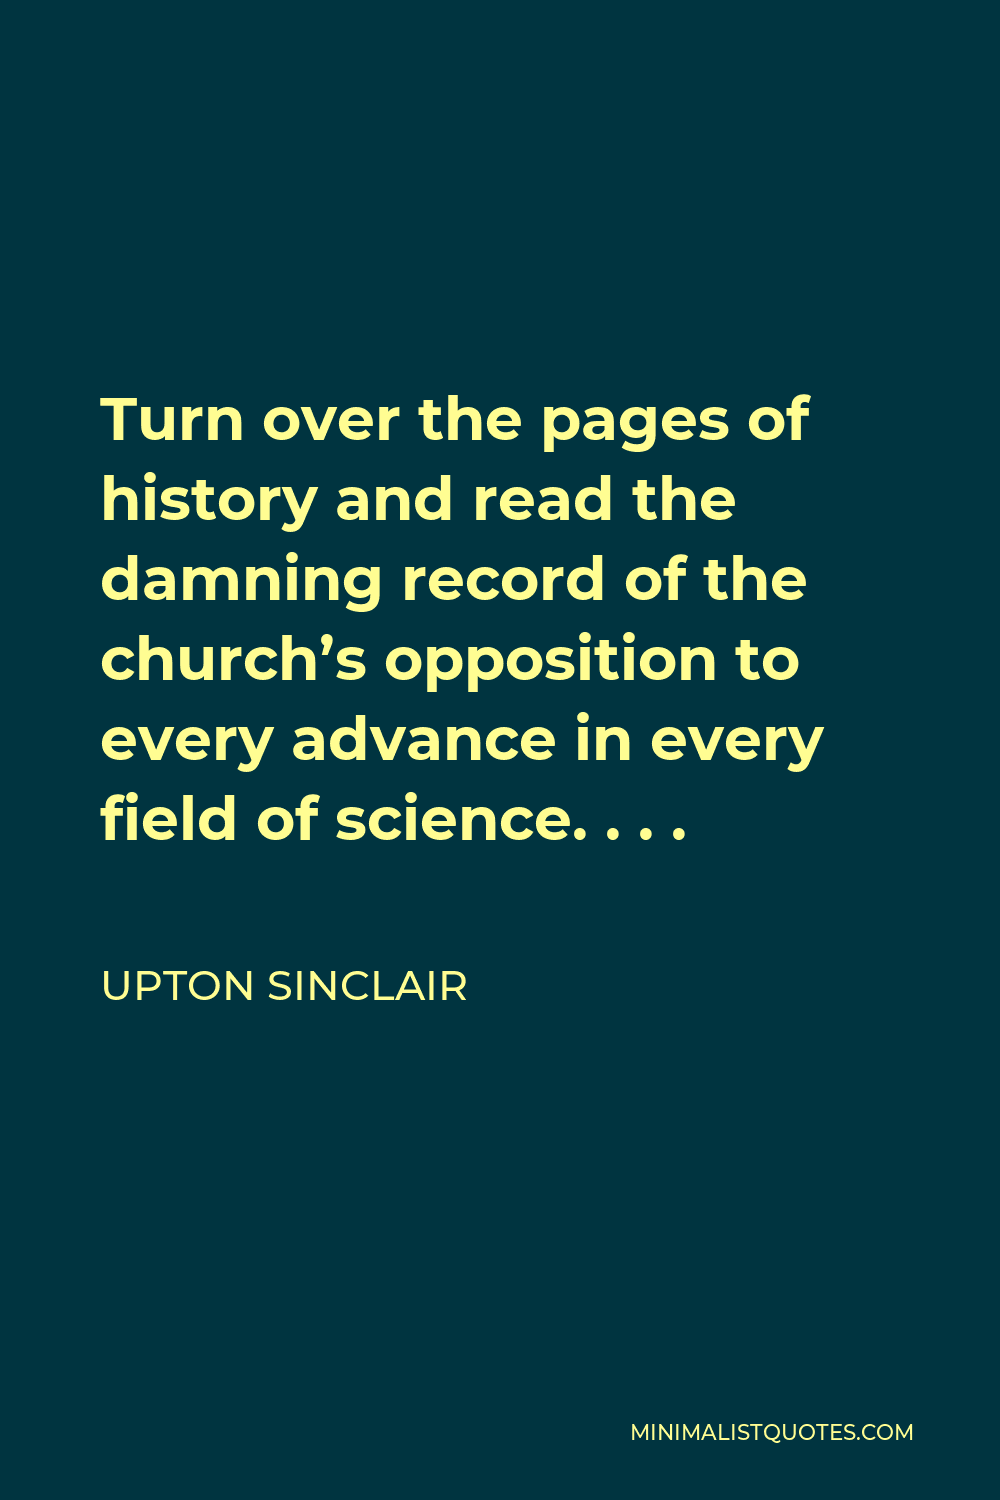 Upton Sinclair Quote - Turn over the pages of history and read the damning record of the church’s opposition to every advance in every field of science. . . .